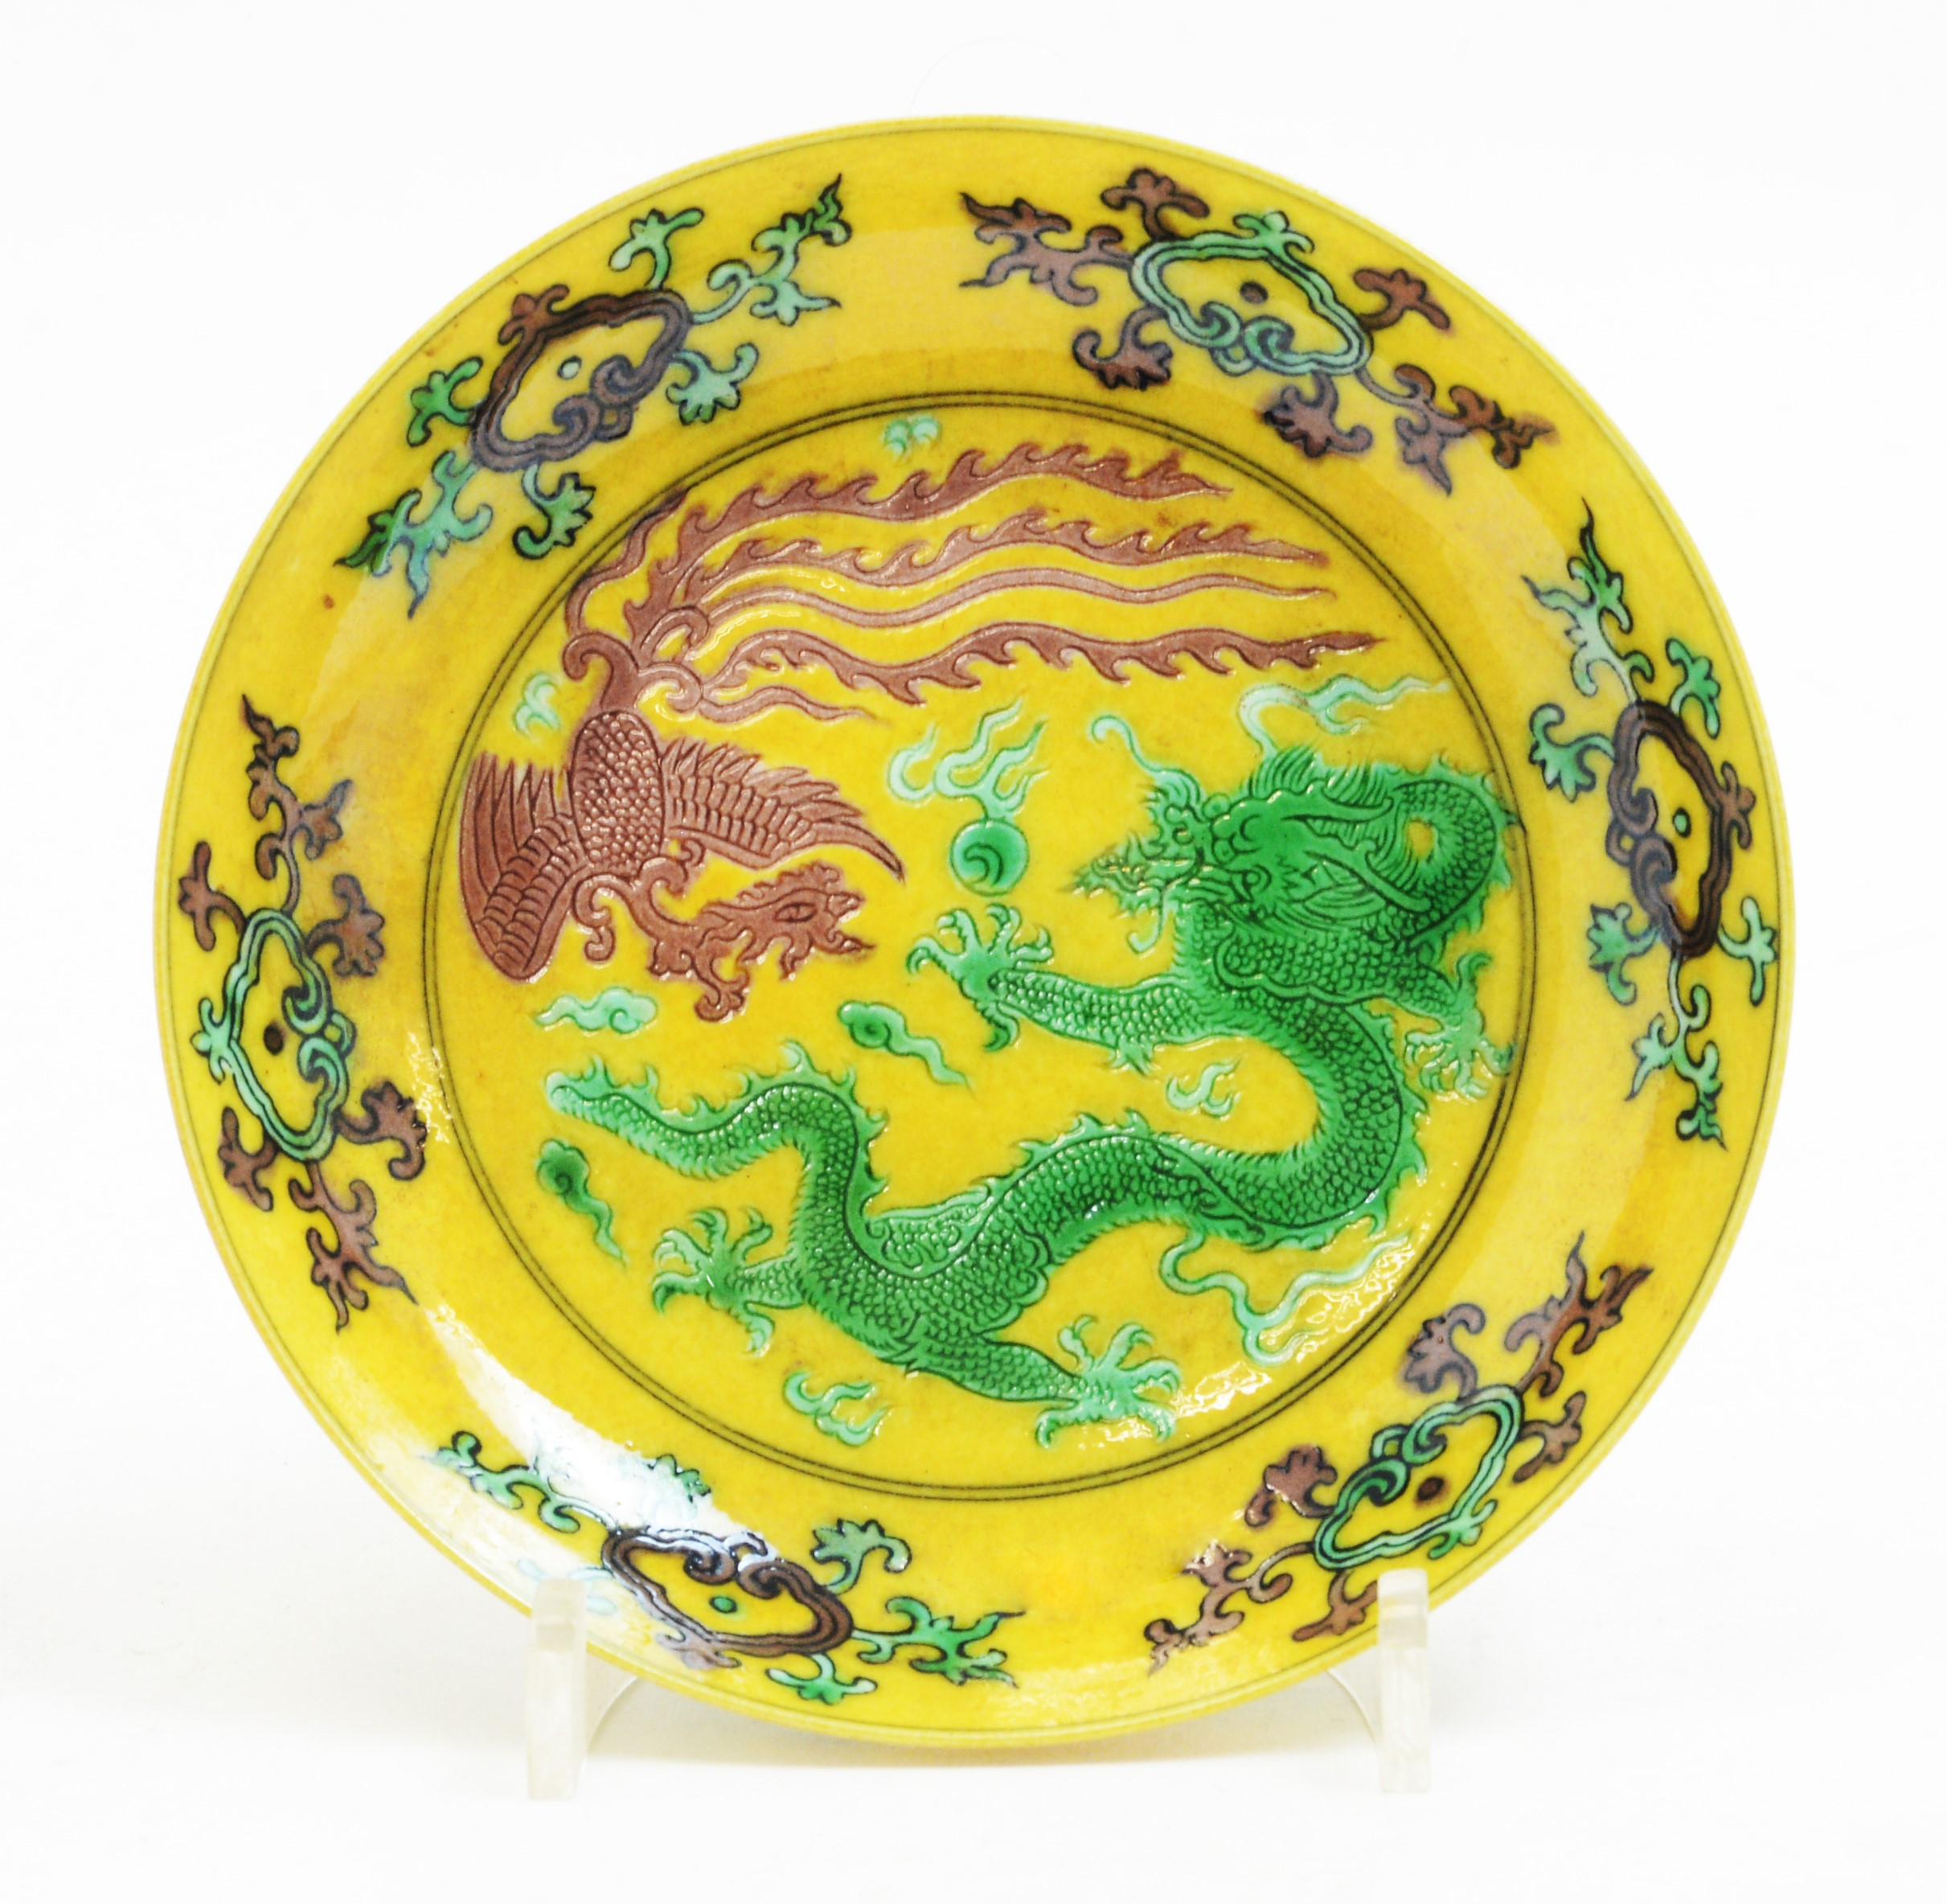 Chinese 'biscuit' saucer dish